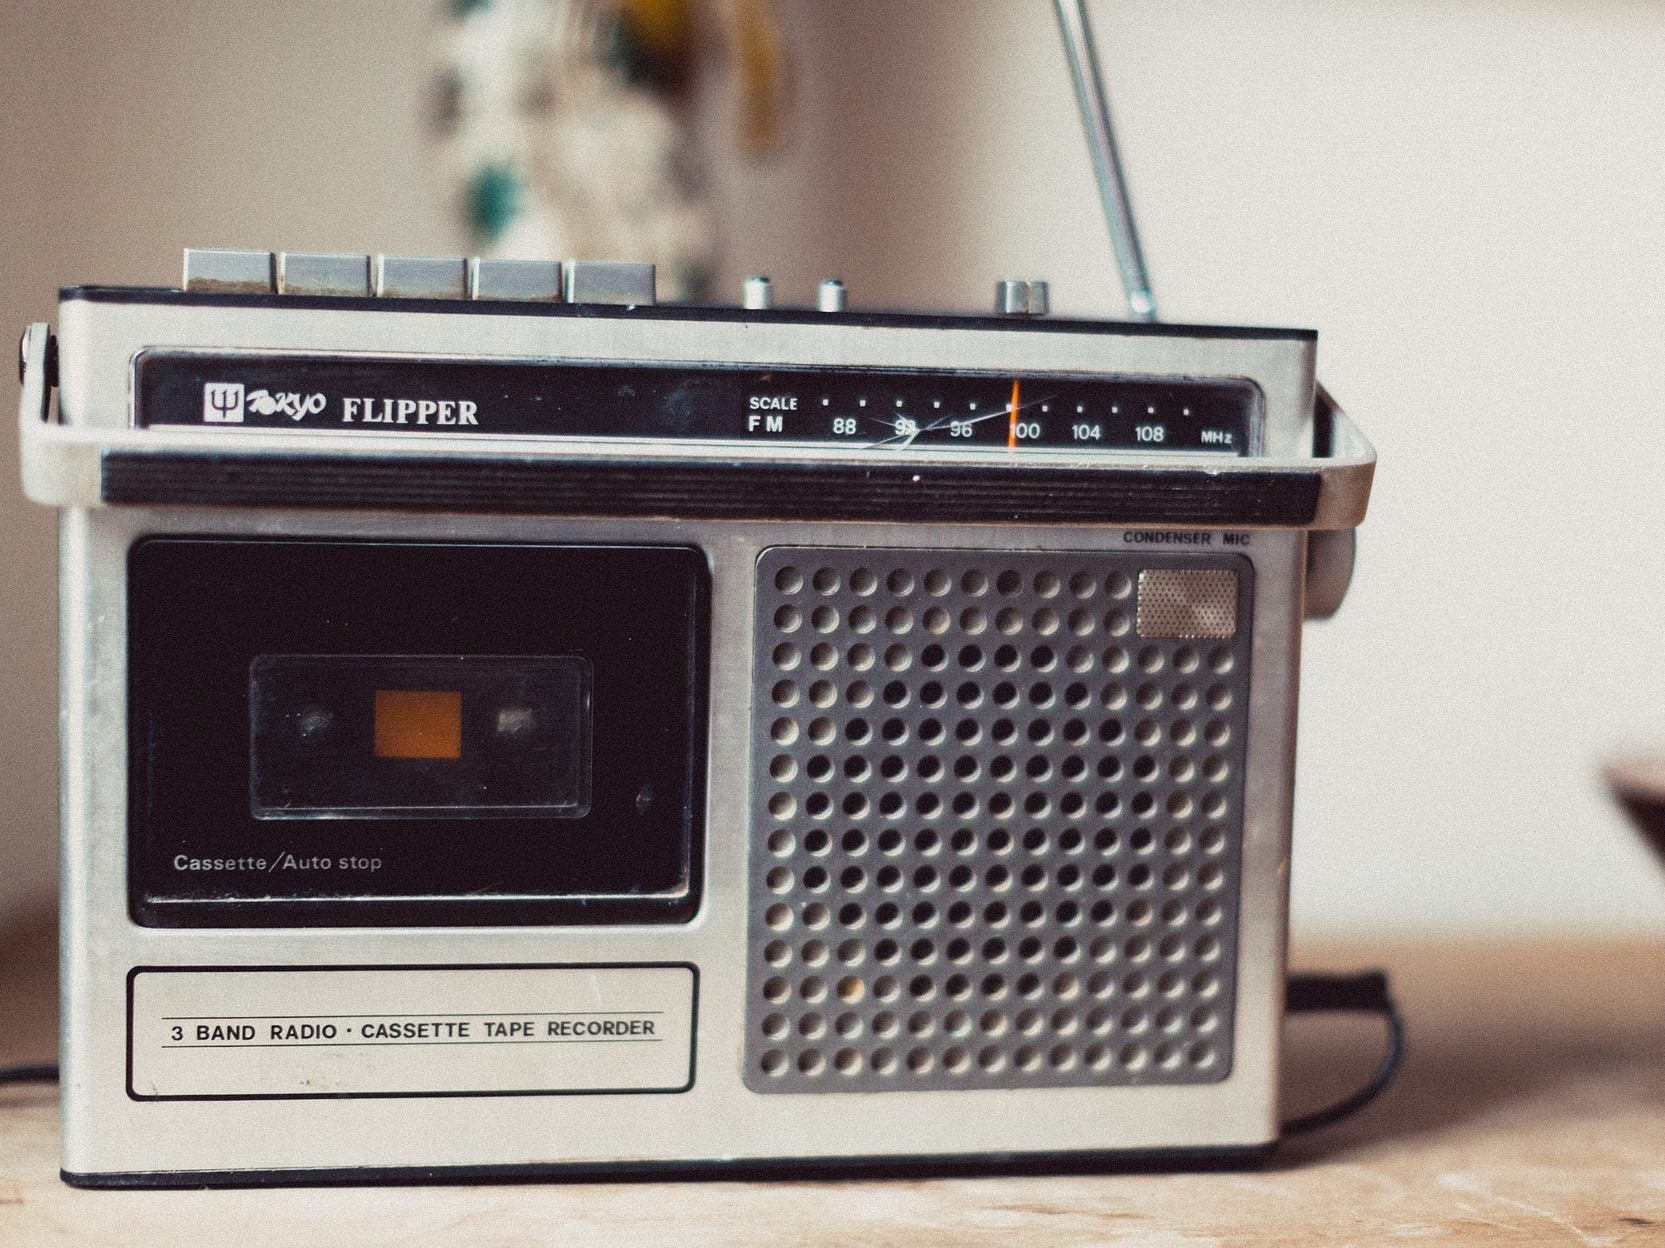 Radio revenues and smart speaker adoption to grow in 2019, Deloitte forecasts